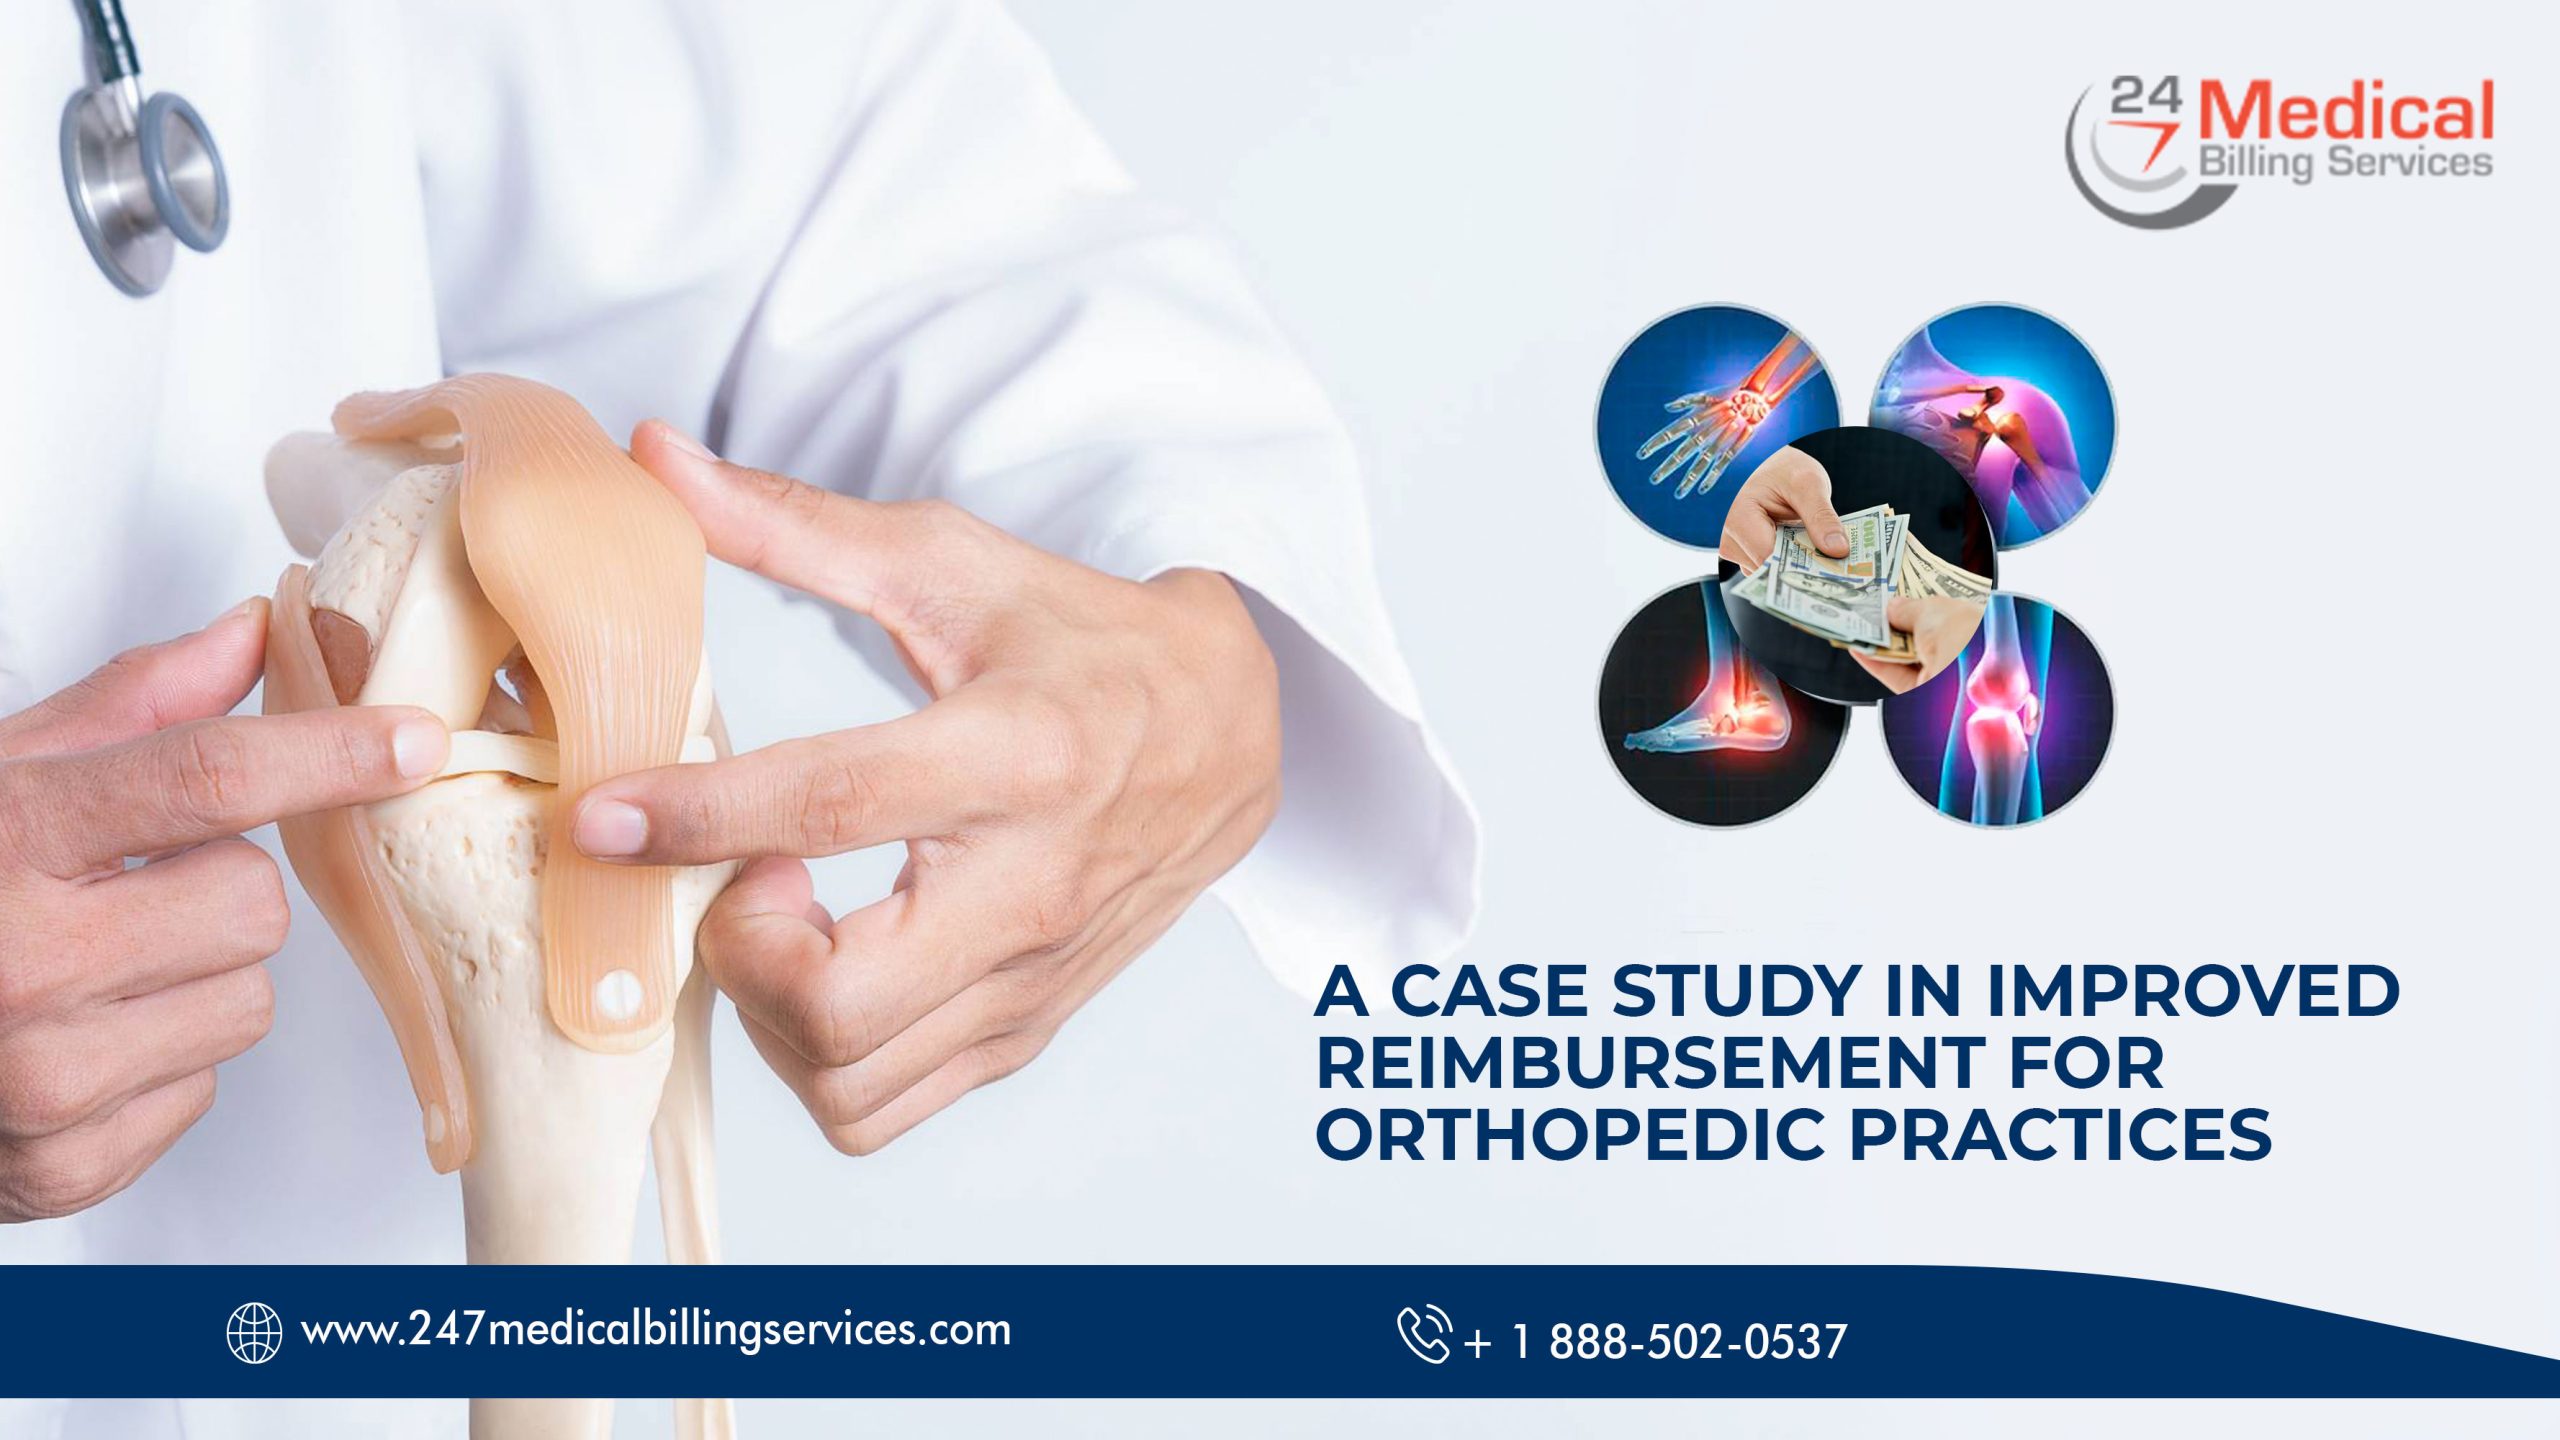  A Case Study in Improved Reimbursement for Orthopedic Practices